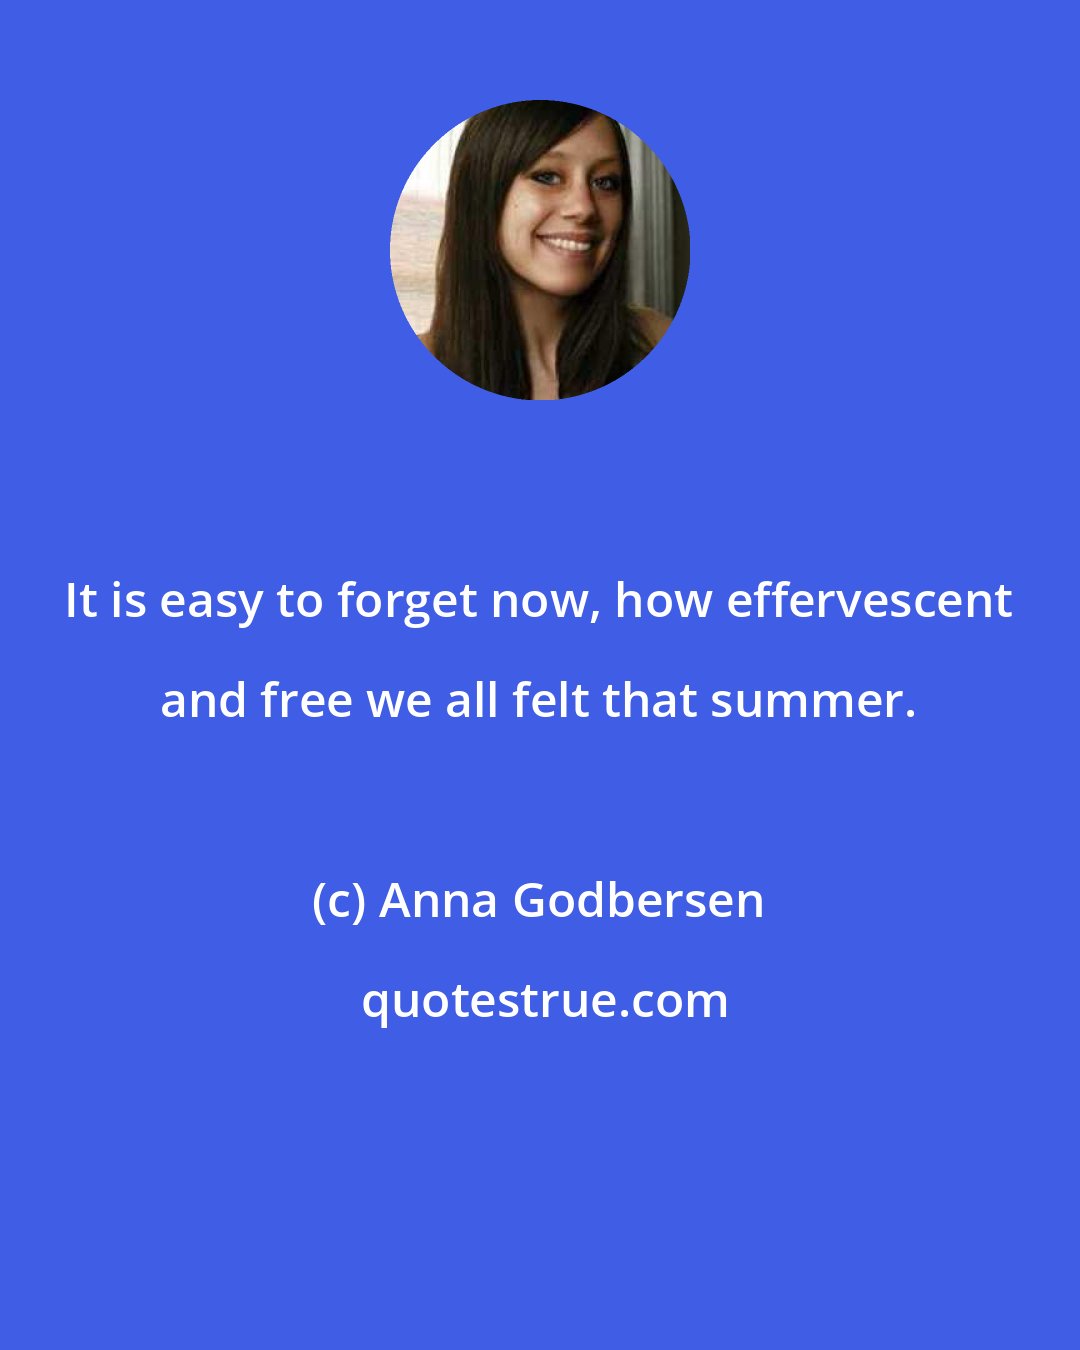 Anna Godbersen: It is easy to forget now, how effervescent and free we all felt that summer.